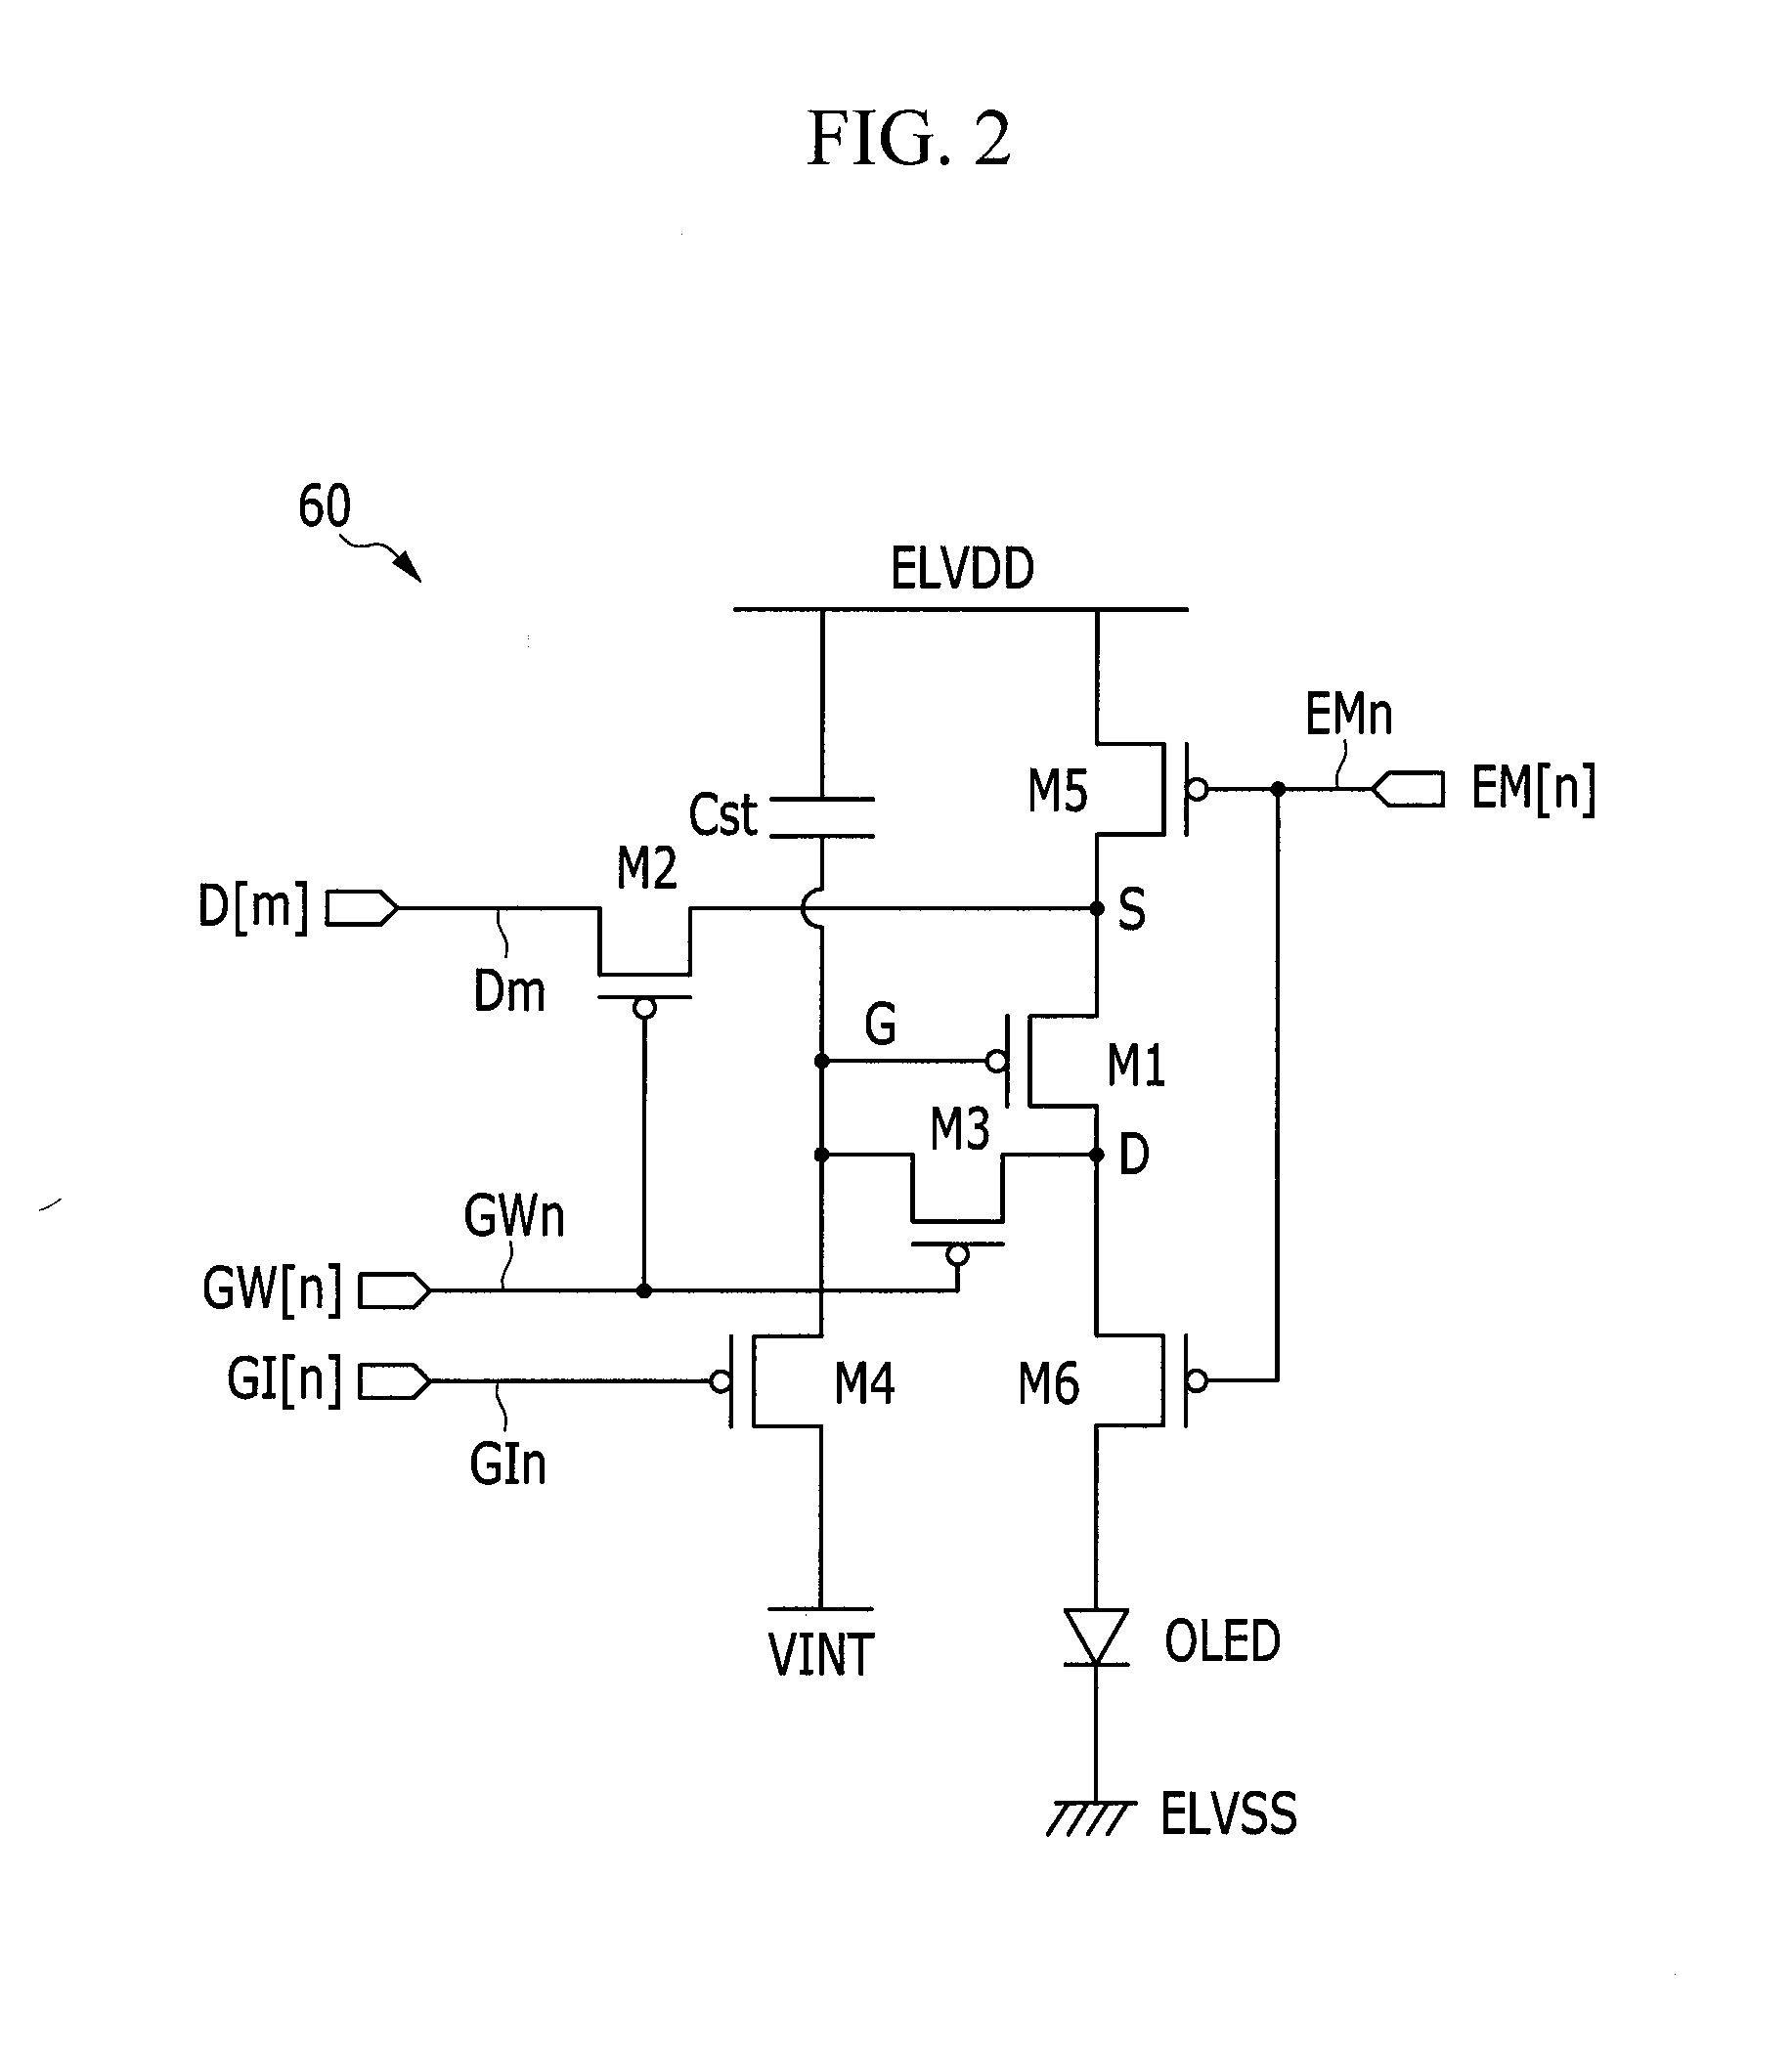 Scan driver and display device including the same